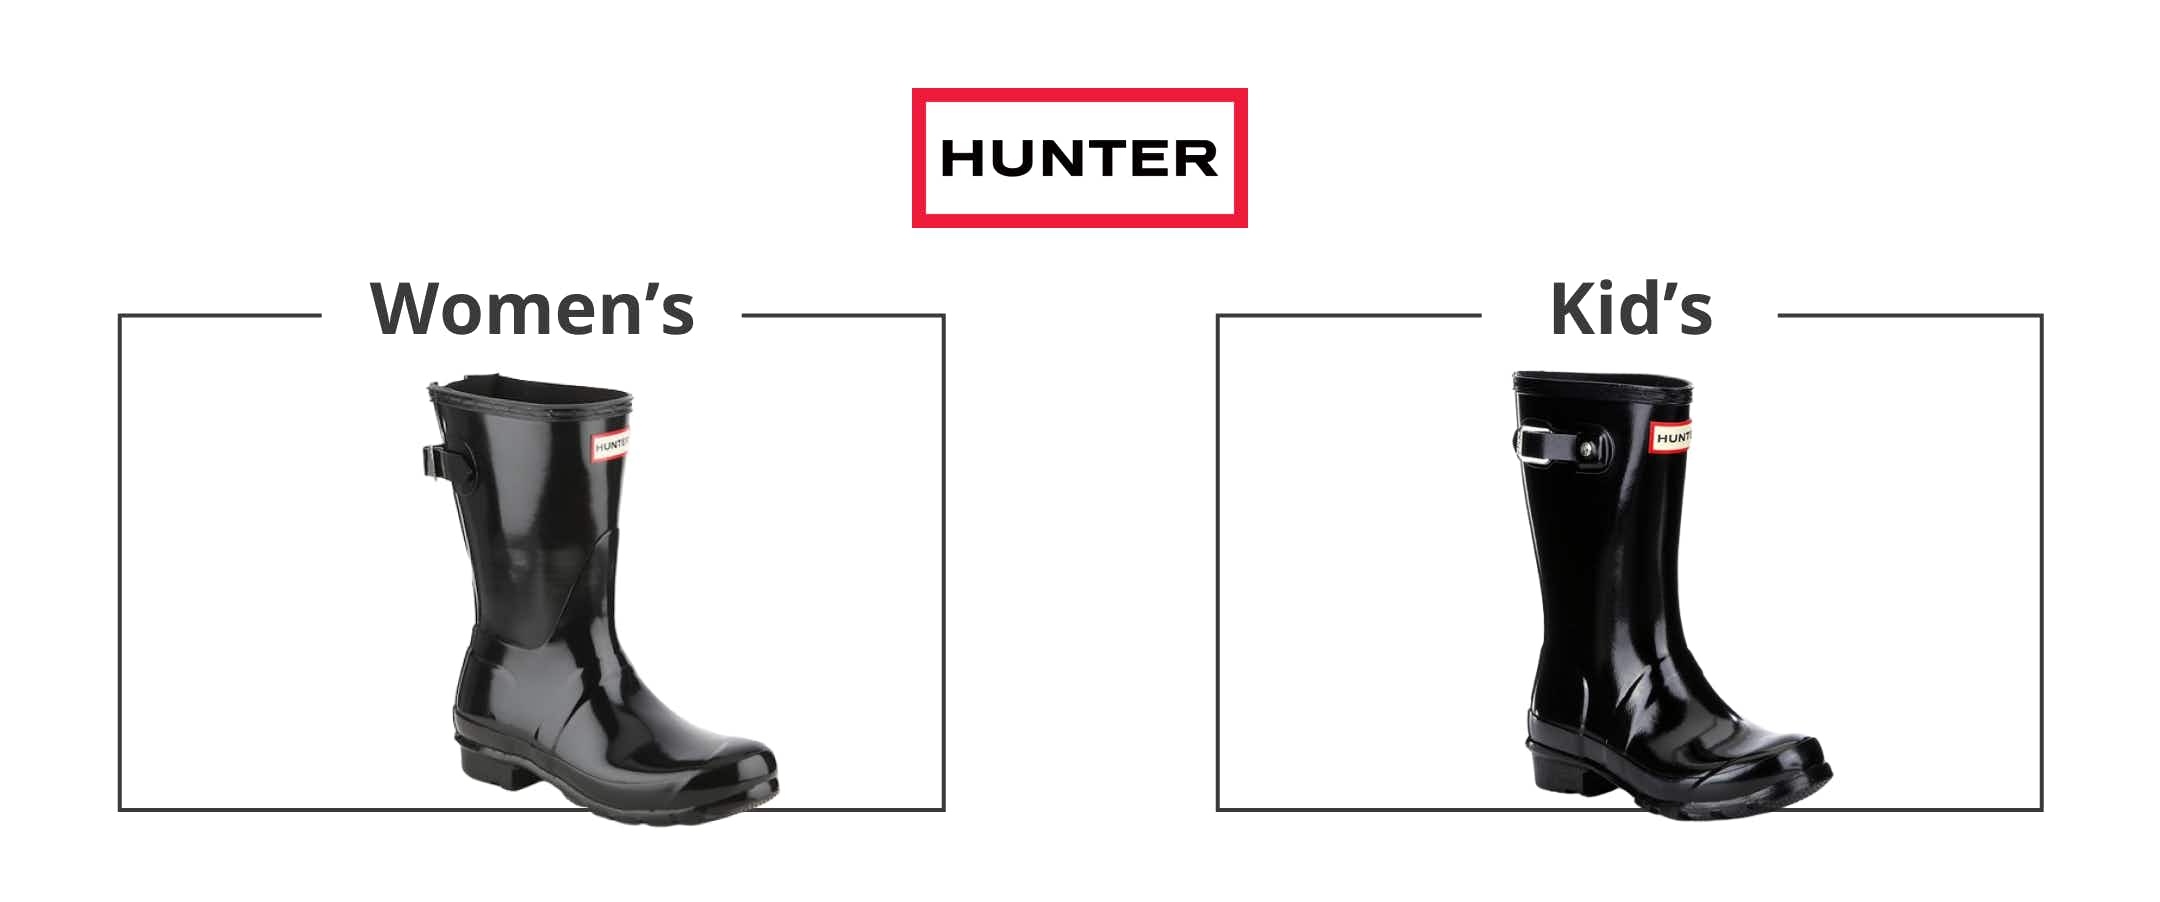 A comparison of a kid's and women's Hunter shoe